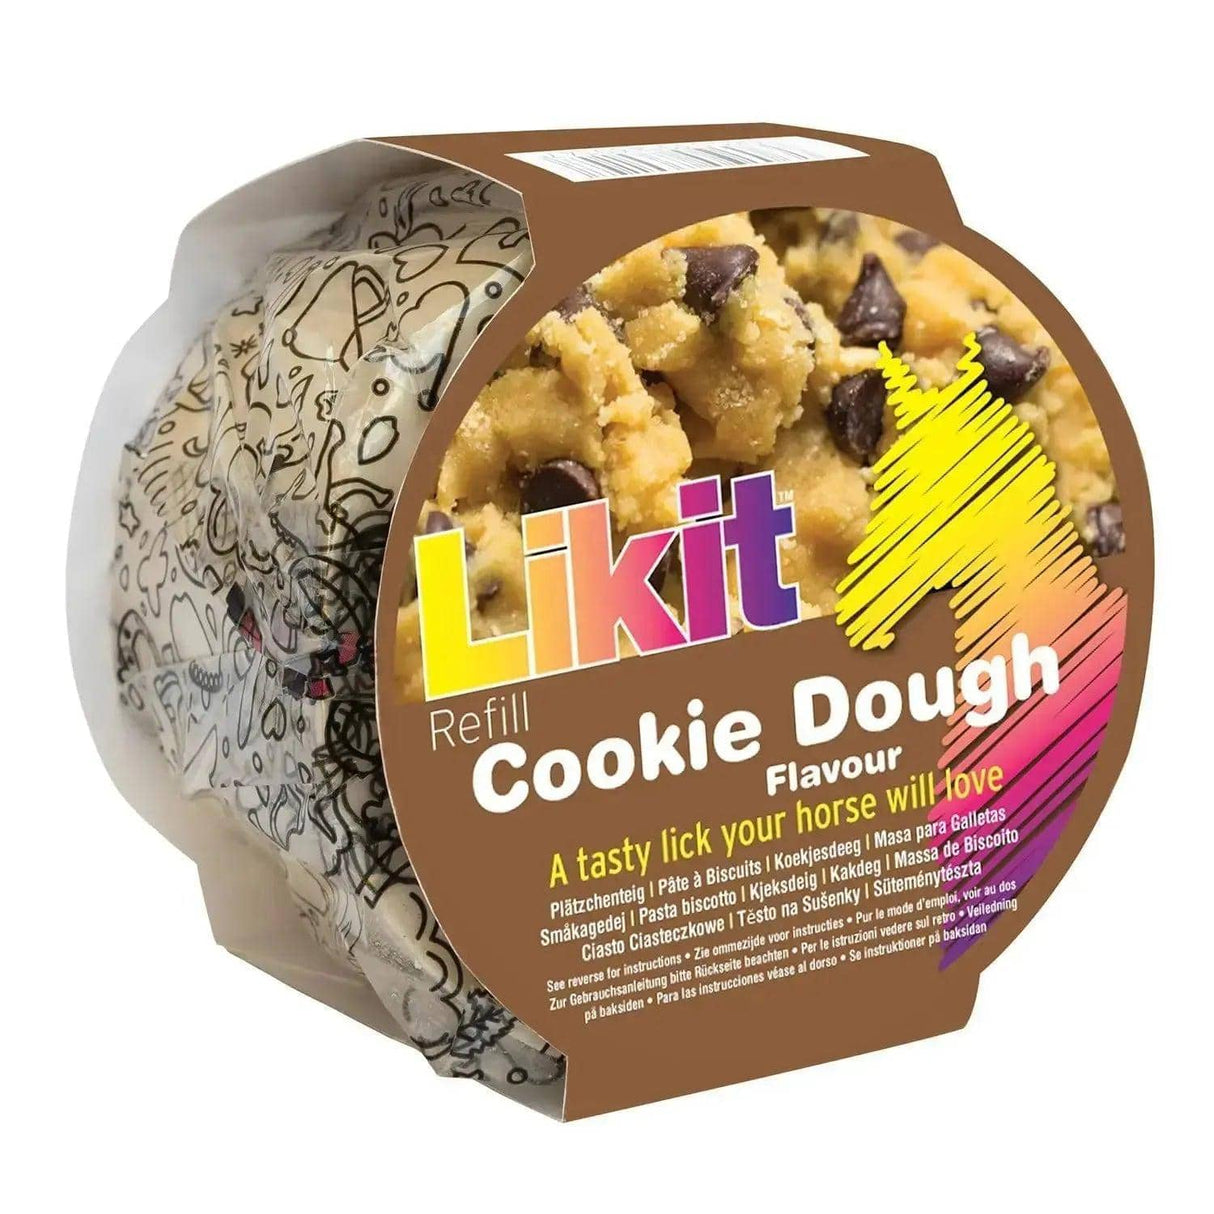 Likit Treats Rope Refill 650g Cookie Dough Likit Horse Licks Treats and Toys Barnstaple Equestrian Supplies